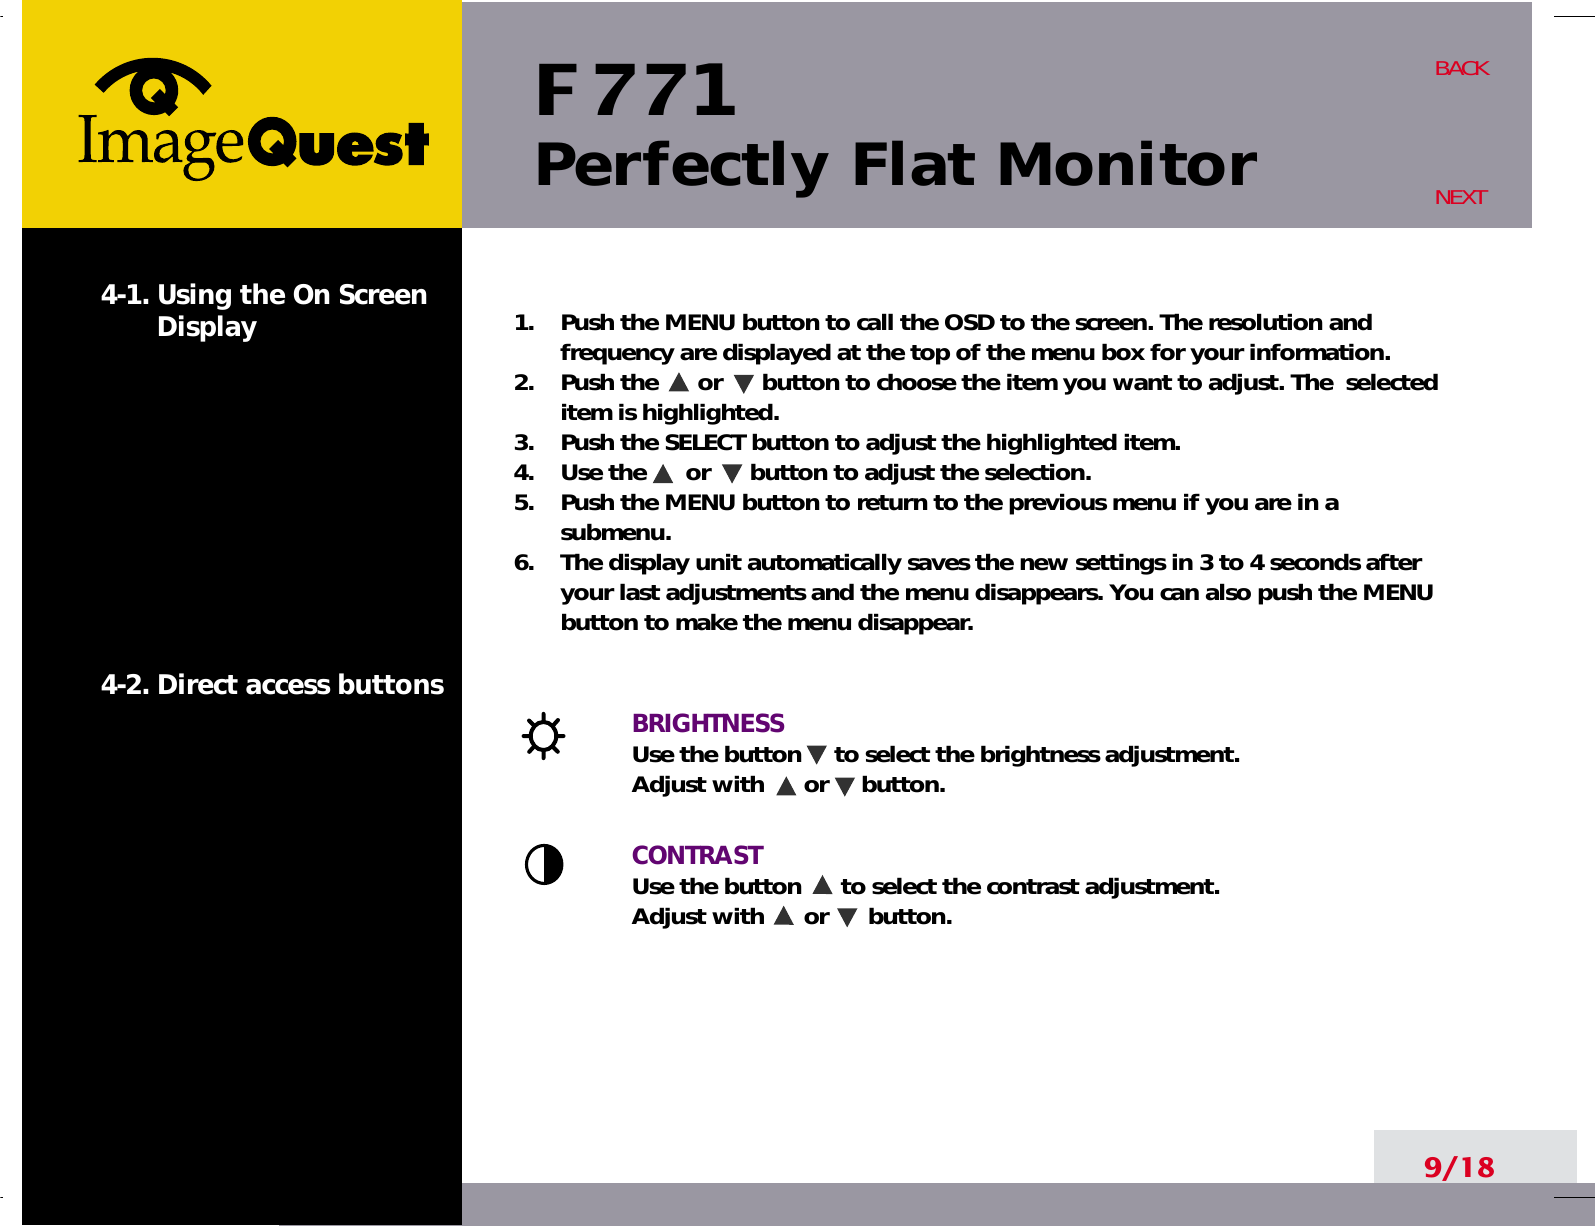 F 771Perfectly Flat Monitor9/18BACKNEXT1.    Push the MENU button to call the OSD to the screen. The resolution andfrequency are displayed at the top of the menu box for your information.2.    Push the      or      button to choose the item you want to adjust. The  selecteditem is highlighted.3.    Push the SELECT button to adjust the highlighted item. 4.    Use the      or      button to adjust the selection.5.    Push the MENU button to return to the previous menu if you are in asubmenu.6.    The display unit automatically saves the new settings in 3 to 4 seconds afteryour last adjustments and the menu disappears. You can also push the MENUbutton to make the menu disappear.BRIGHTNESS Use the button     to select the brightness adjustment. Adjust with      or     button.CONTRASTUse the button      to select the contrast adjustment. Adjust with      or      button.4-1. Using the On ScreenDisplay 4-2. Direct access buttons